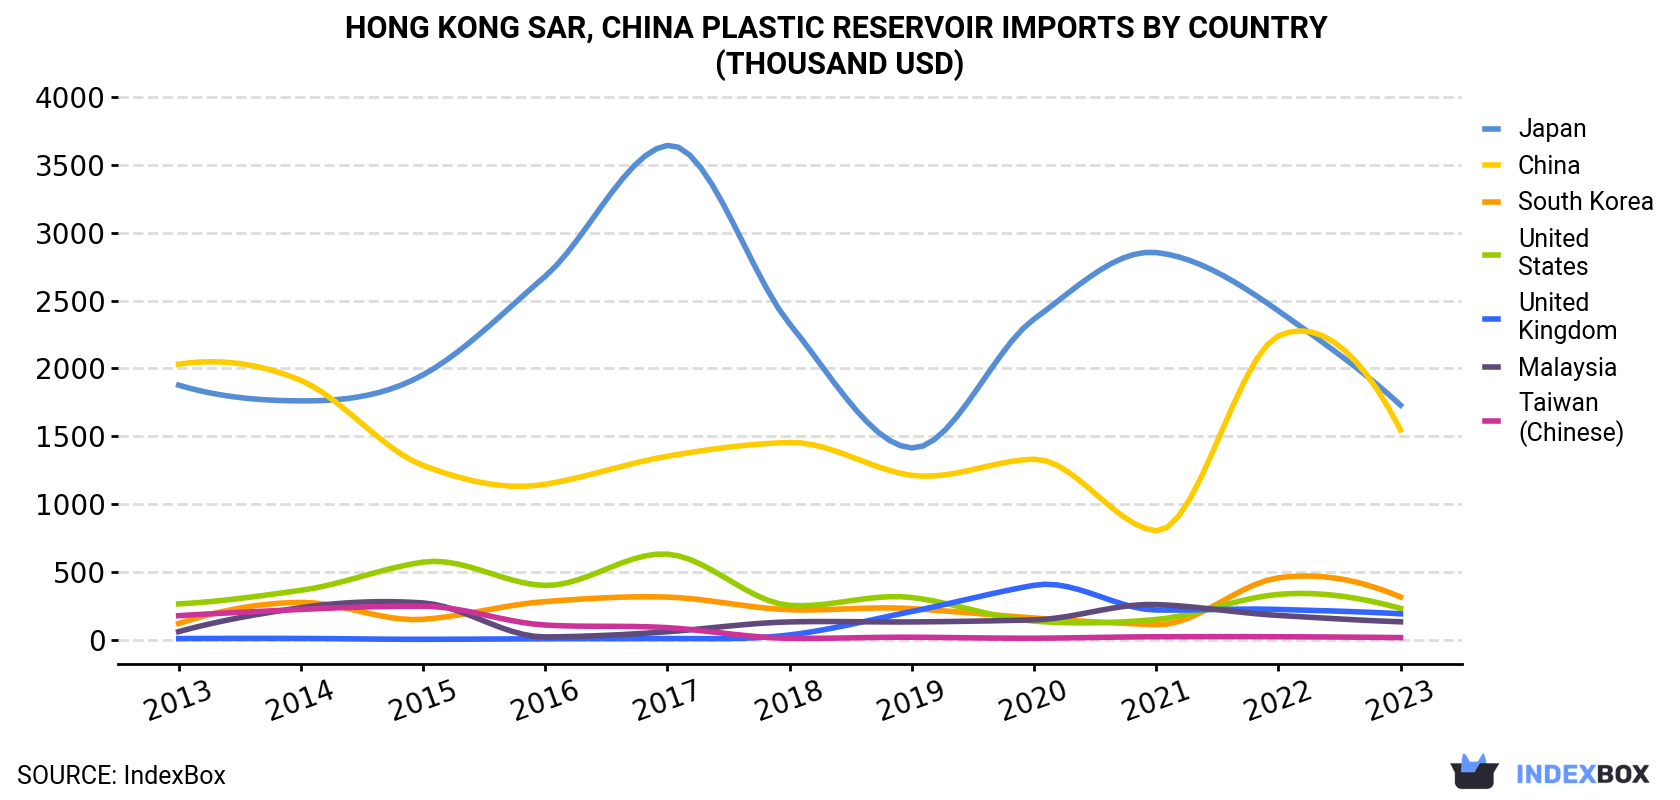 Hong Kong Plastic Reservoir Imports By Country (Thousand USD)